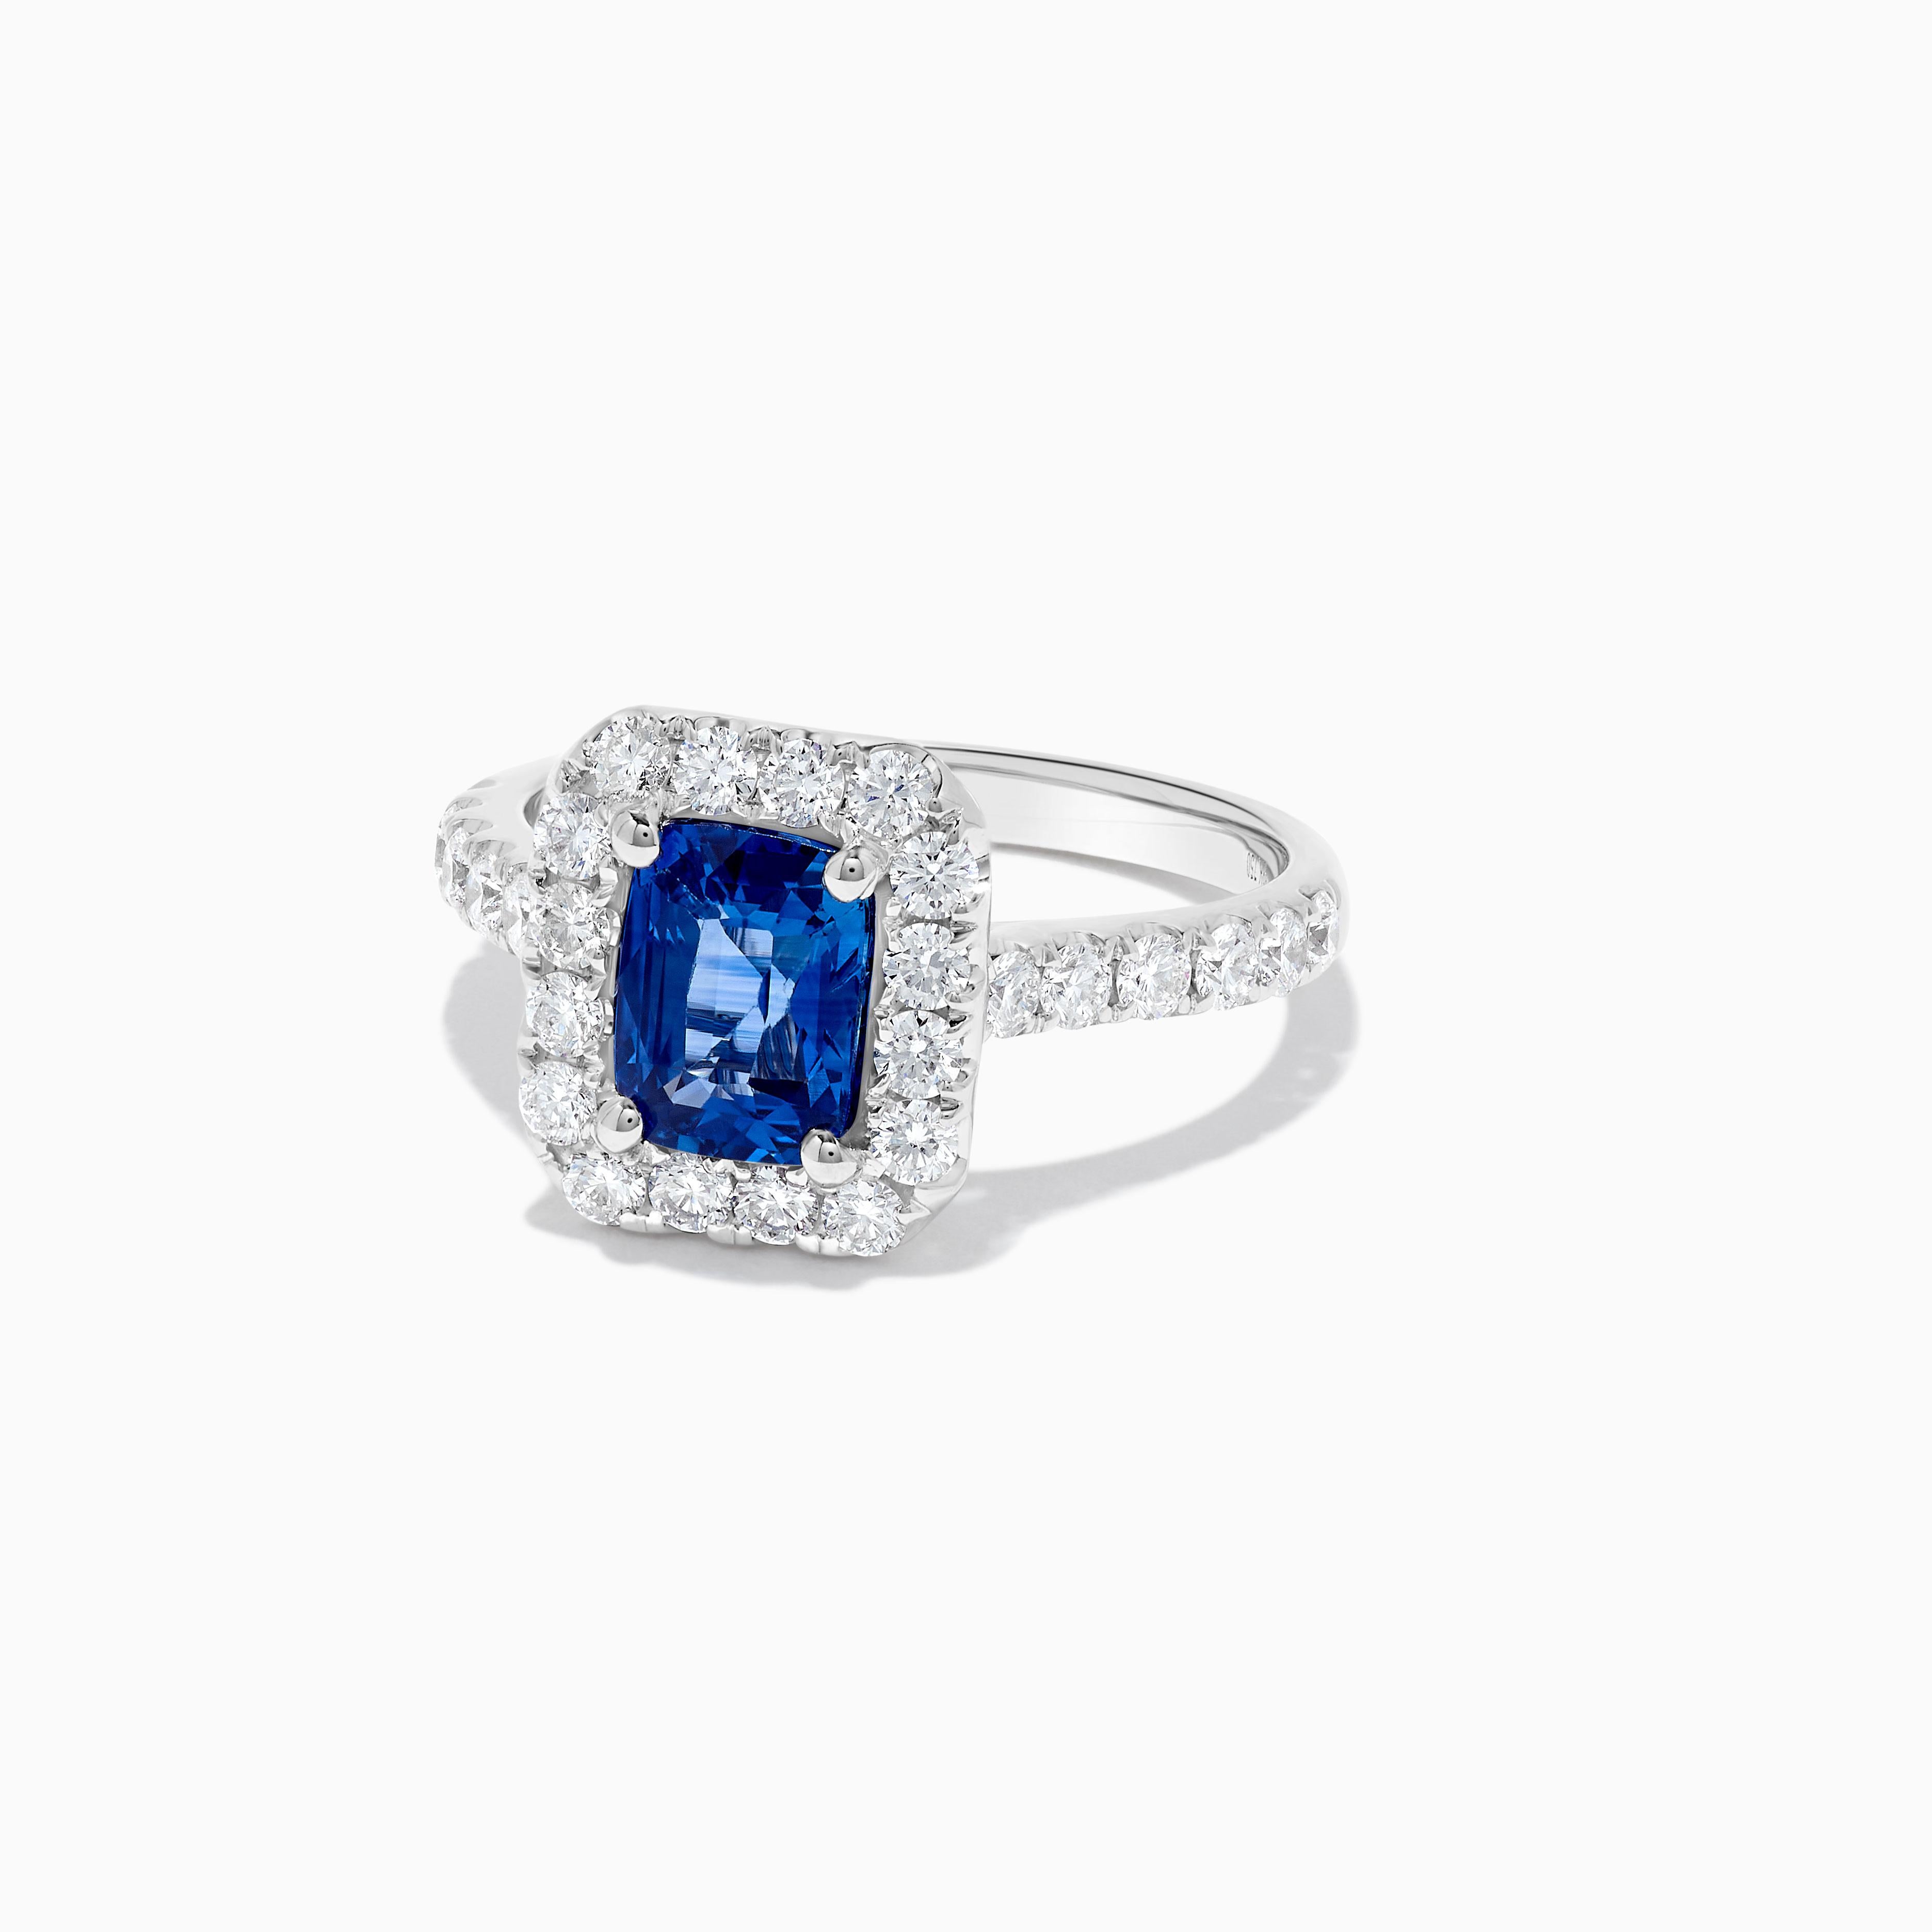 RareGemWorld's classic sapphire ring. Mounted in a beautiful 18K White Gold setting with a natural cushion cut blue sapphire. The sapphire is surrounded by natural round white diamond melee. This ring is guaranteed to impress and enhance your